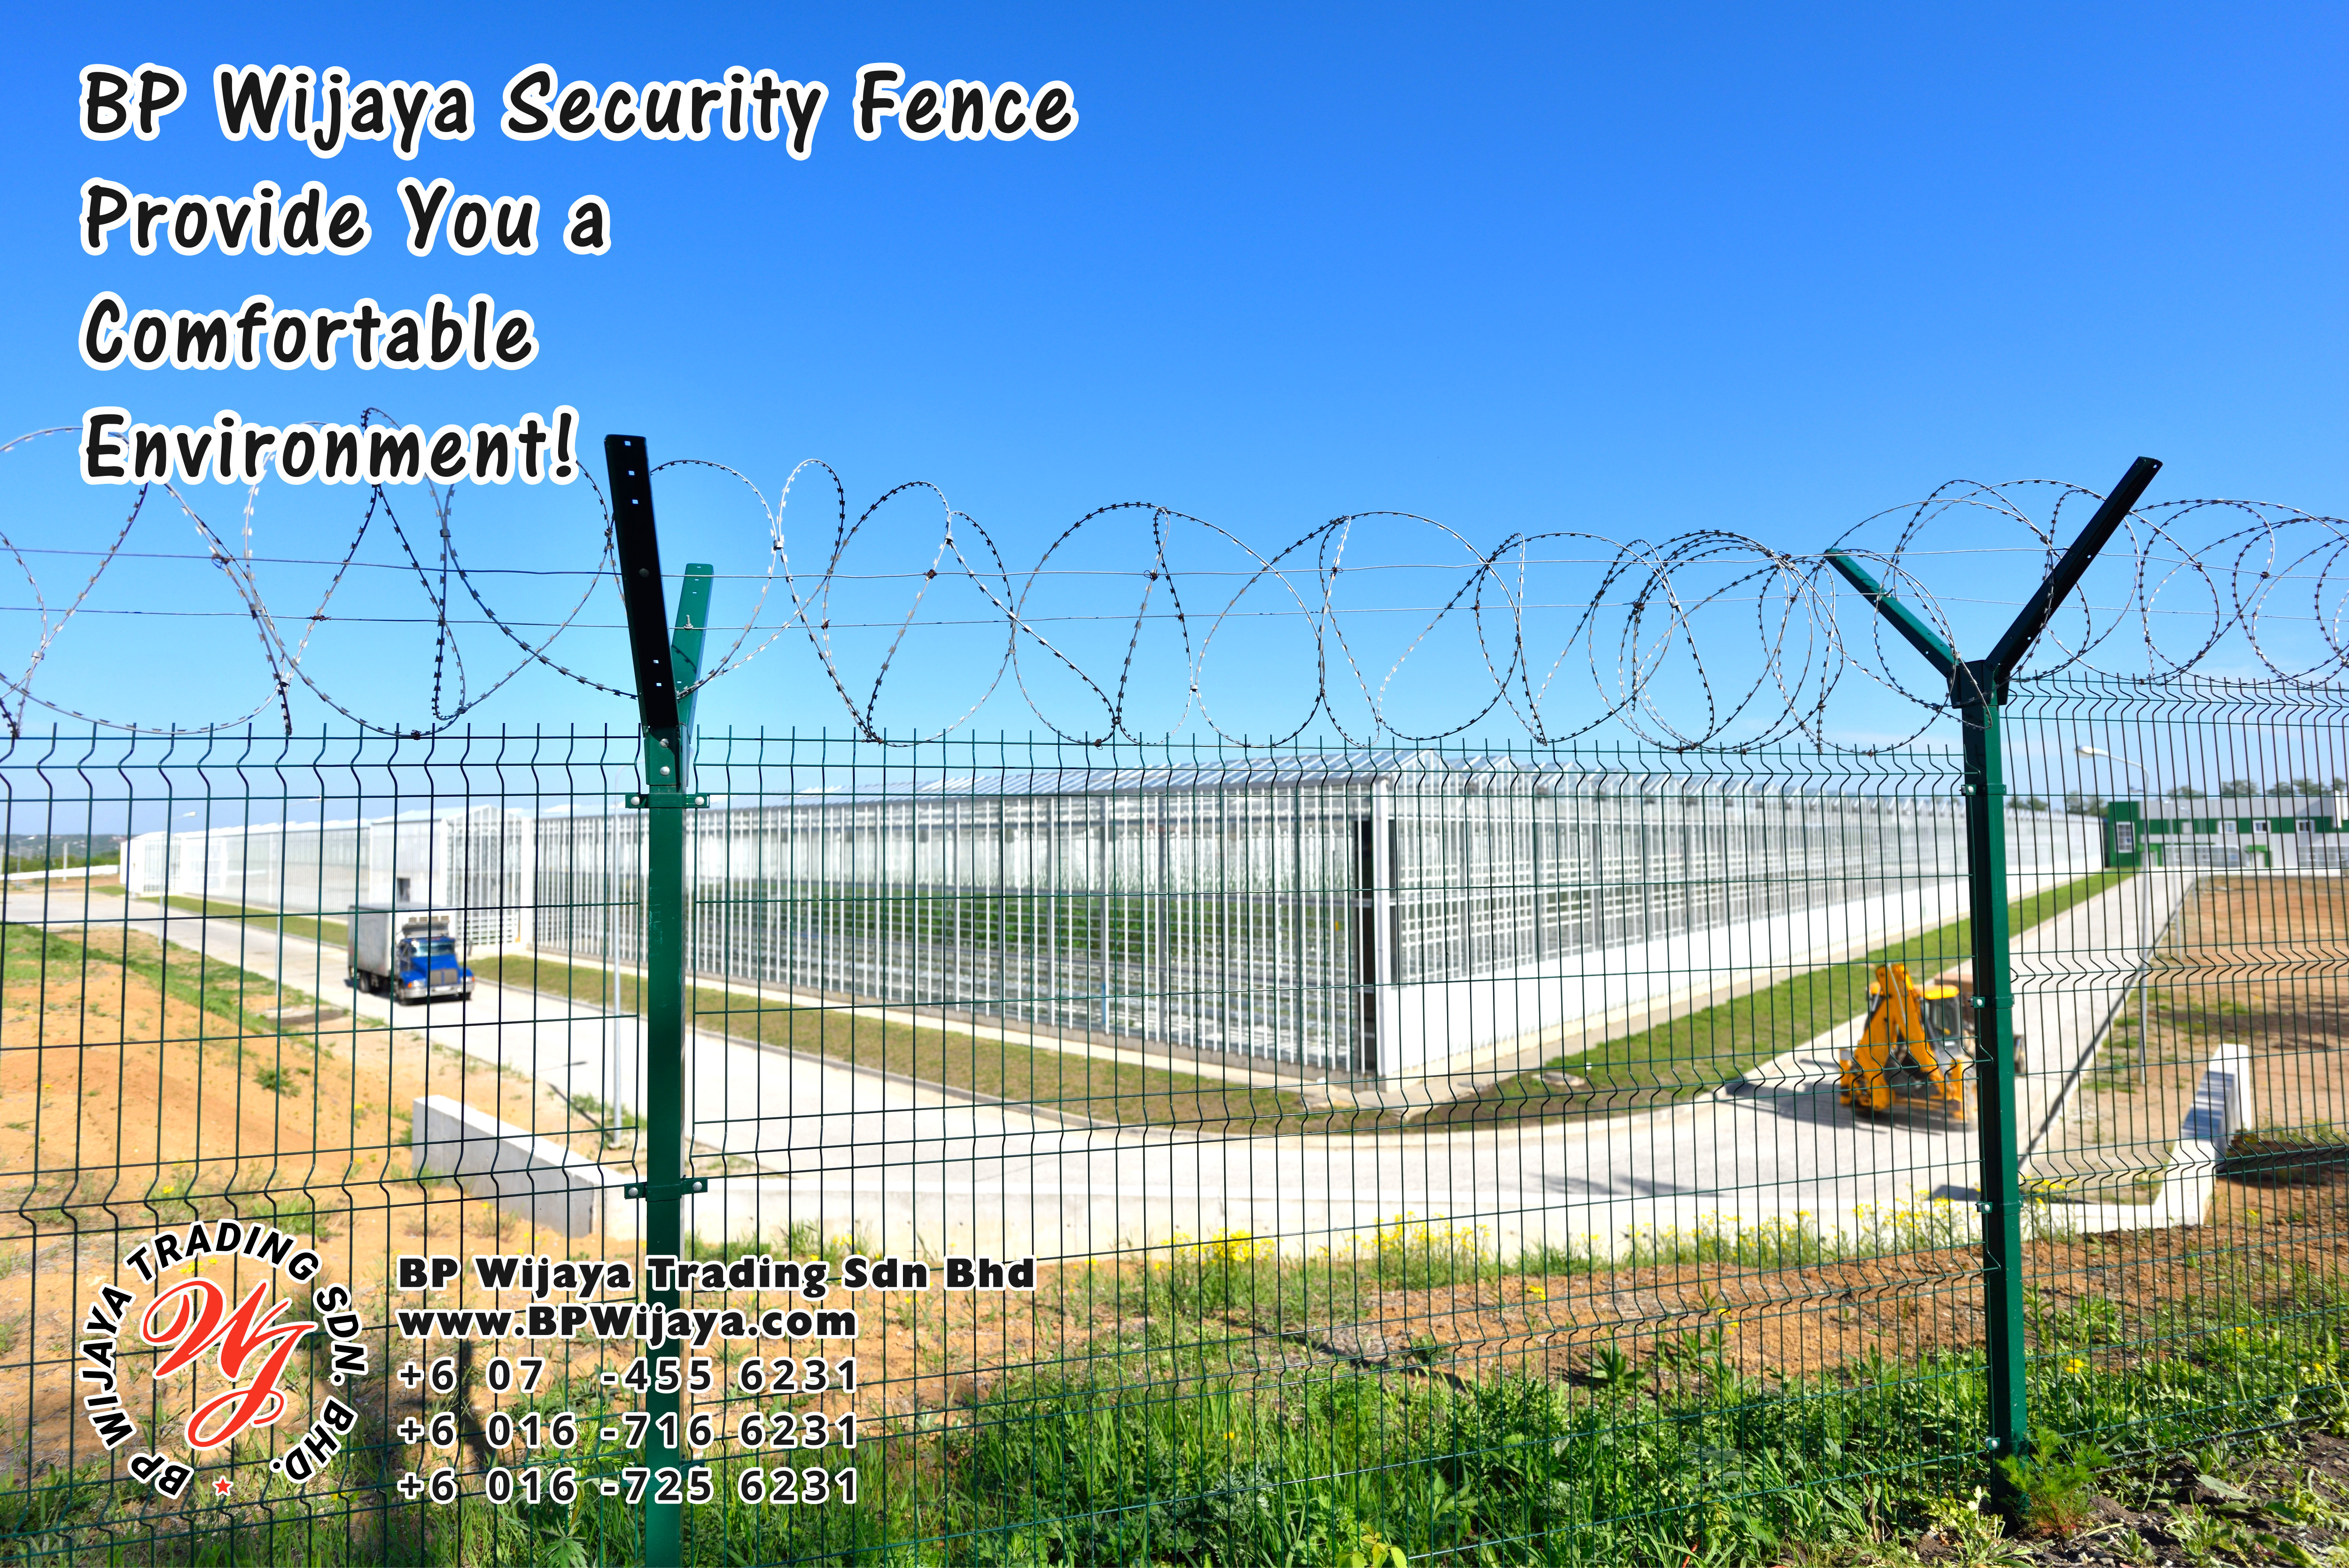 BP Wijaya Trading Sdn Bhd Malaysia Selangor Kuala Lumpur Manufacturer of Safety Fences Building Materials for Housing Construction Site Security Fencing Factory Security Home Security C01-68